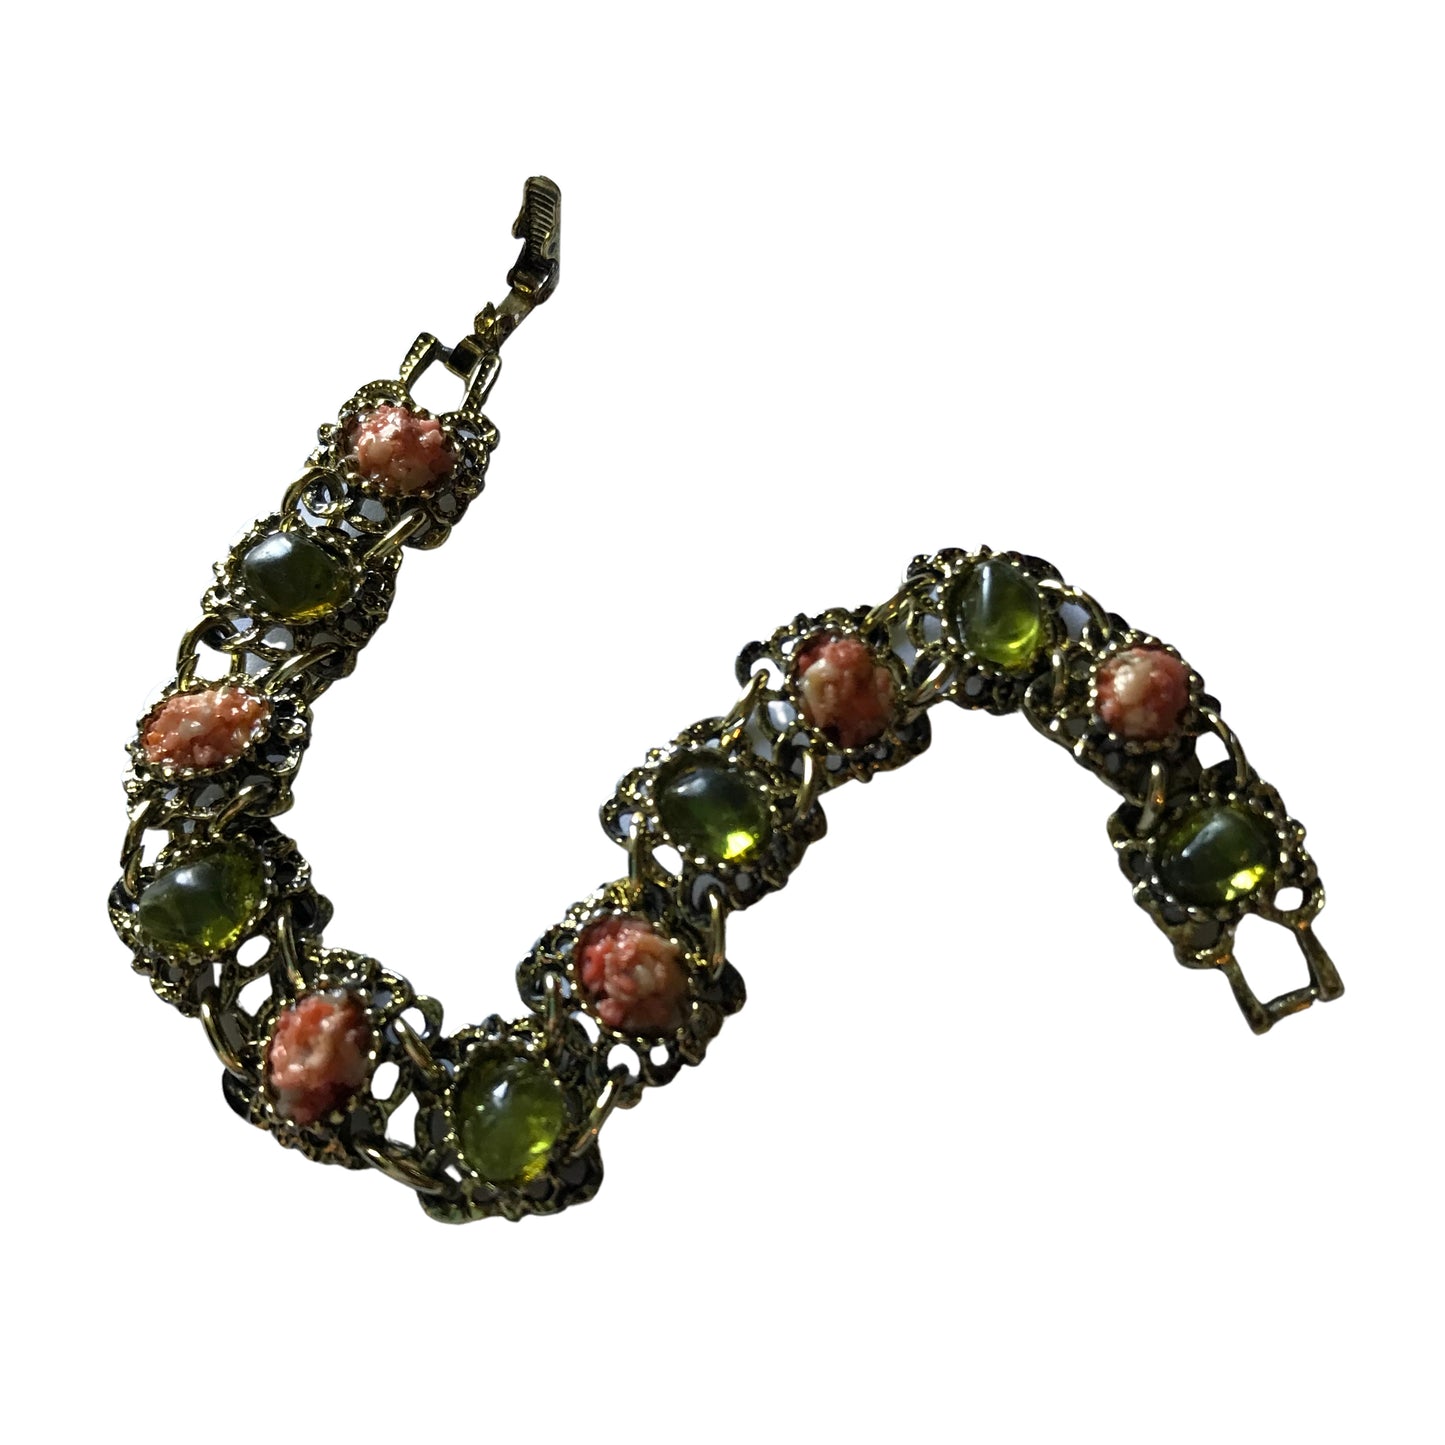 Gold Tone Link Bracelet with Olive and Tangerine Stones circa 1960s